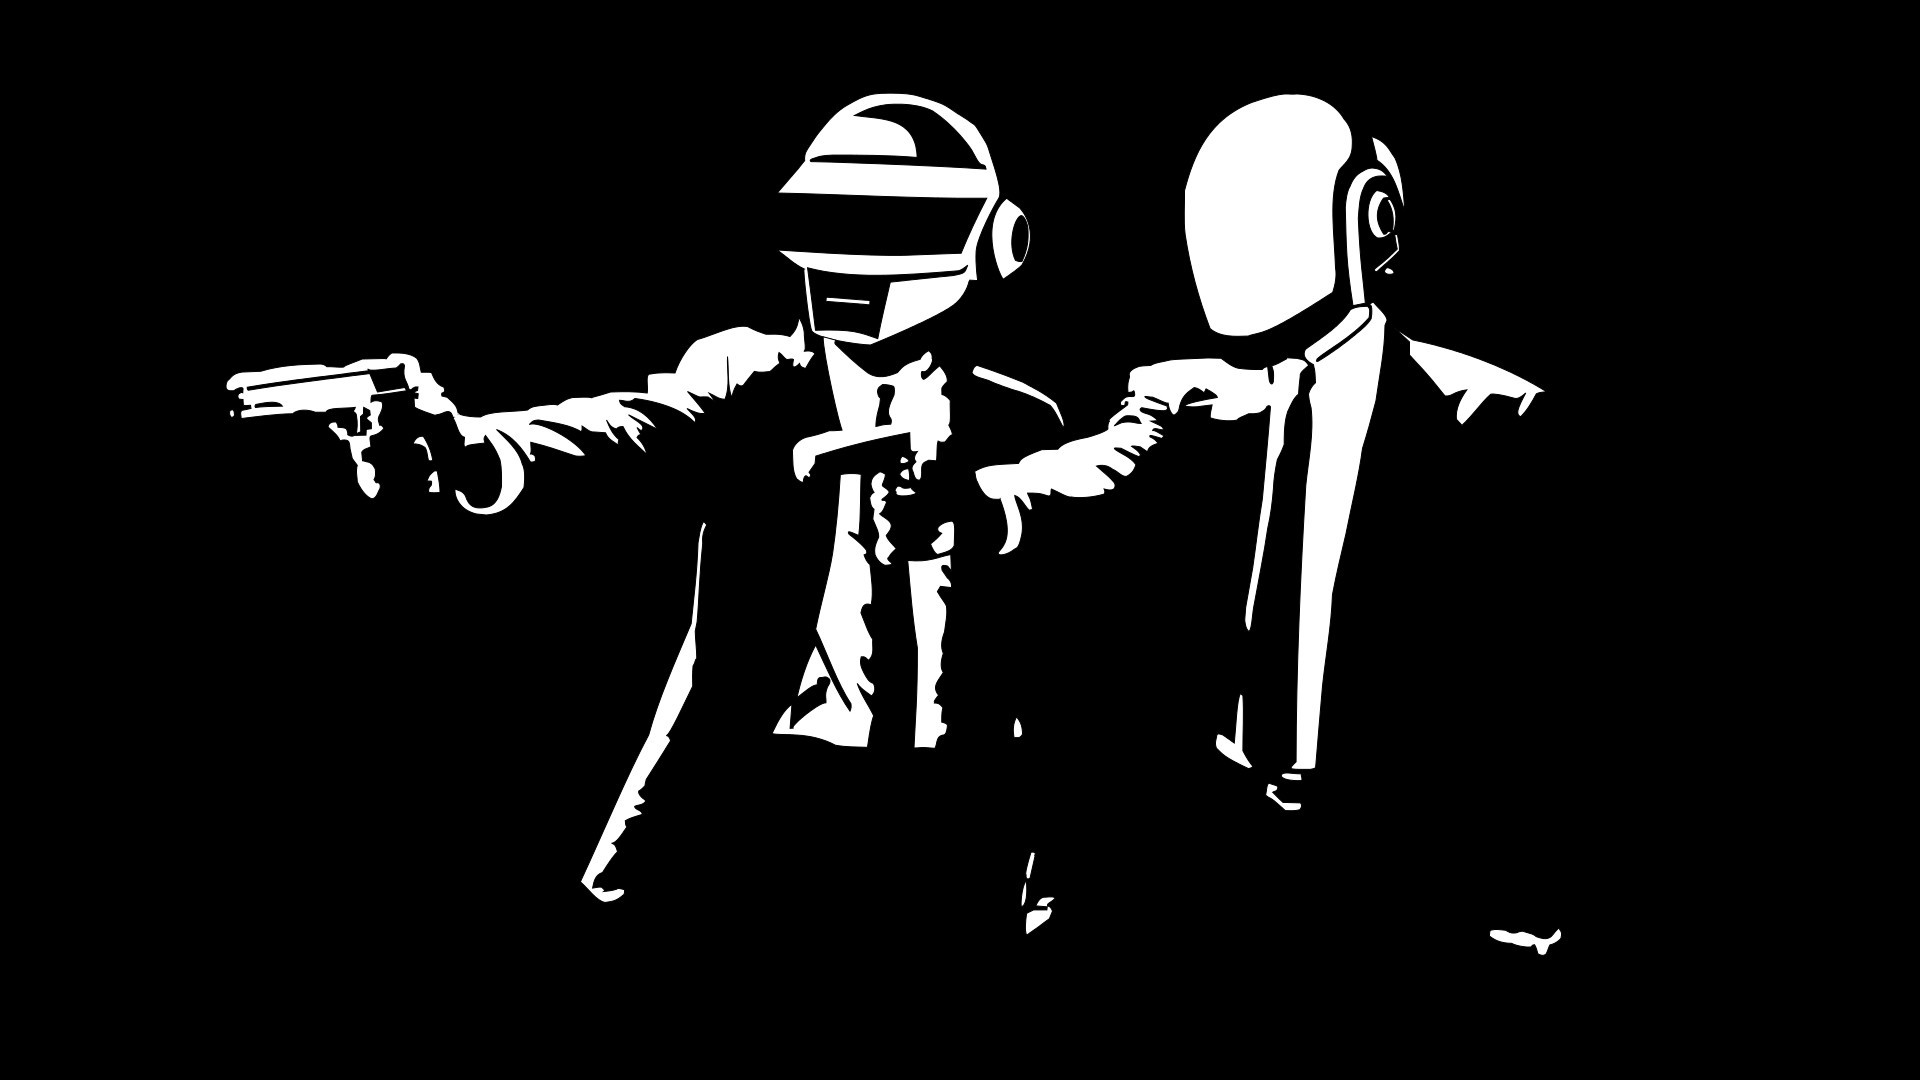 General 1920x1080 music Daft Punk monochrome Pulp Fiction parody gun electronic music weapon simple background black background crossover aiming movies musician